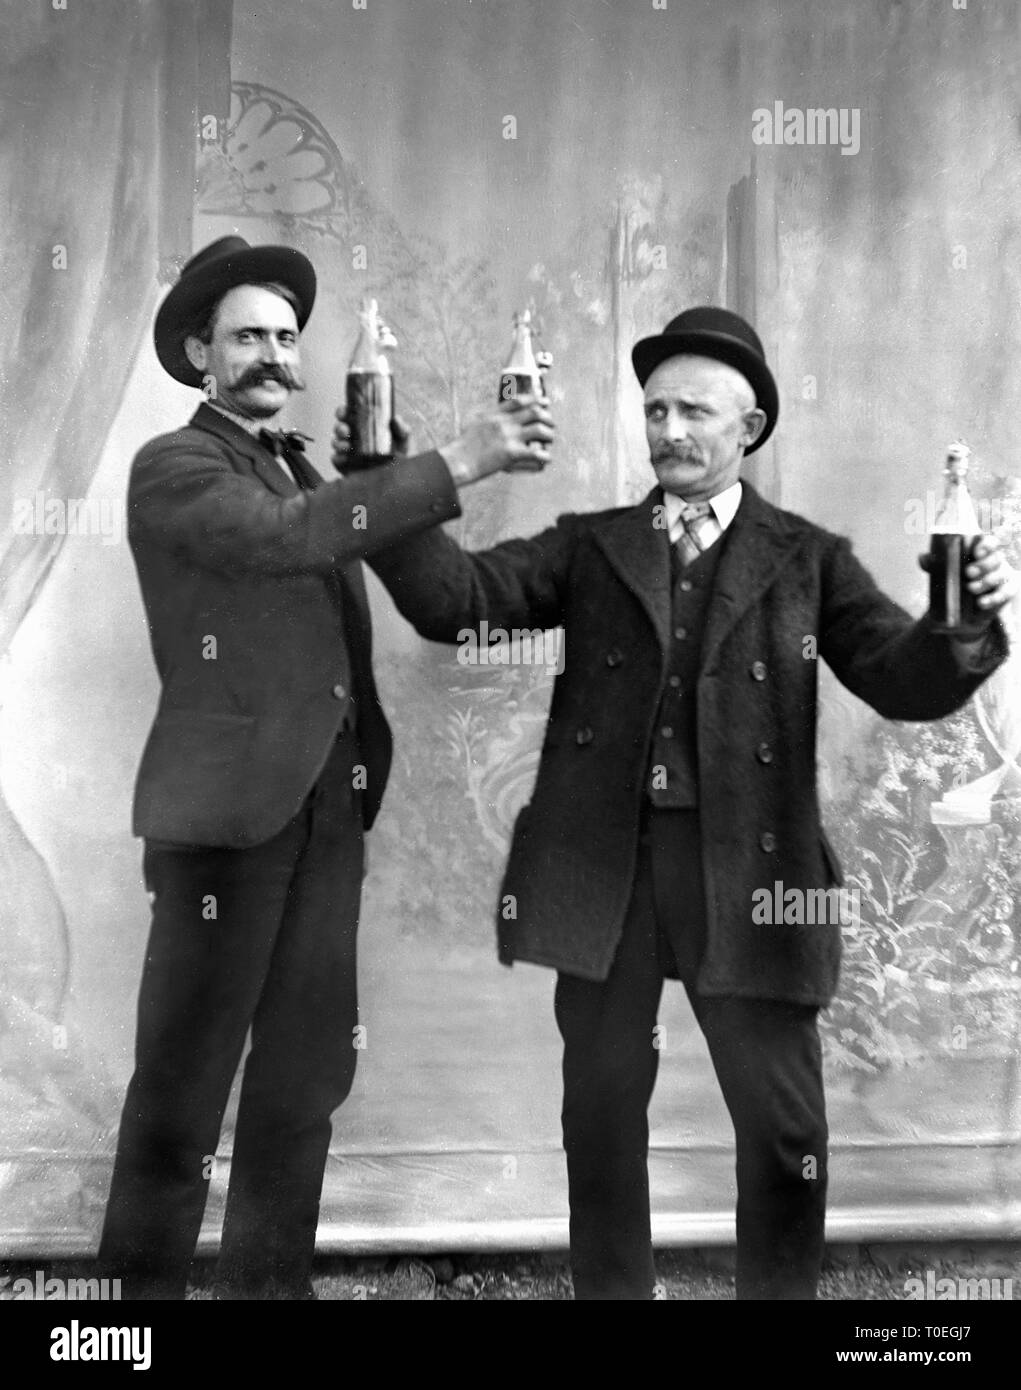 Two early twentieth century men toast each other with beer bottles for a studio portrait, ca. 1905. Stock Photo